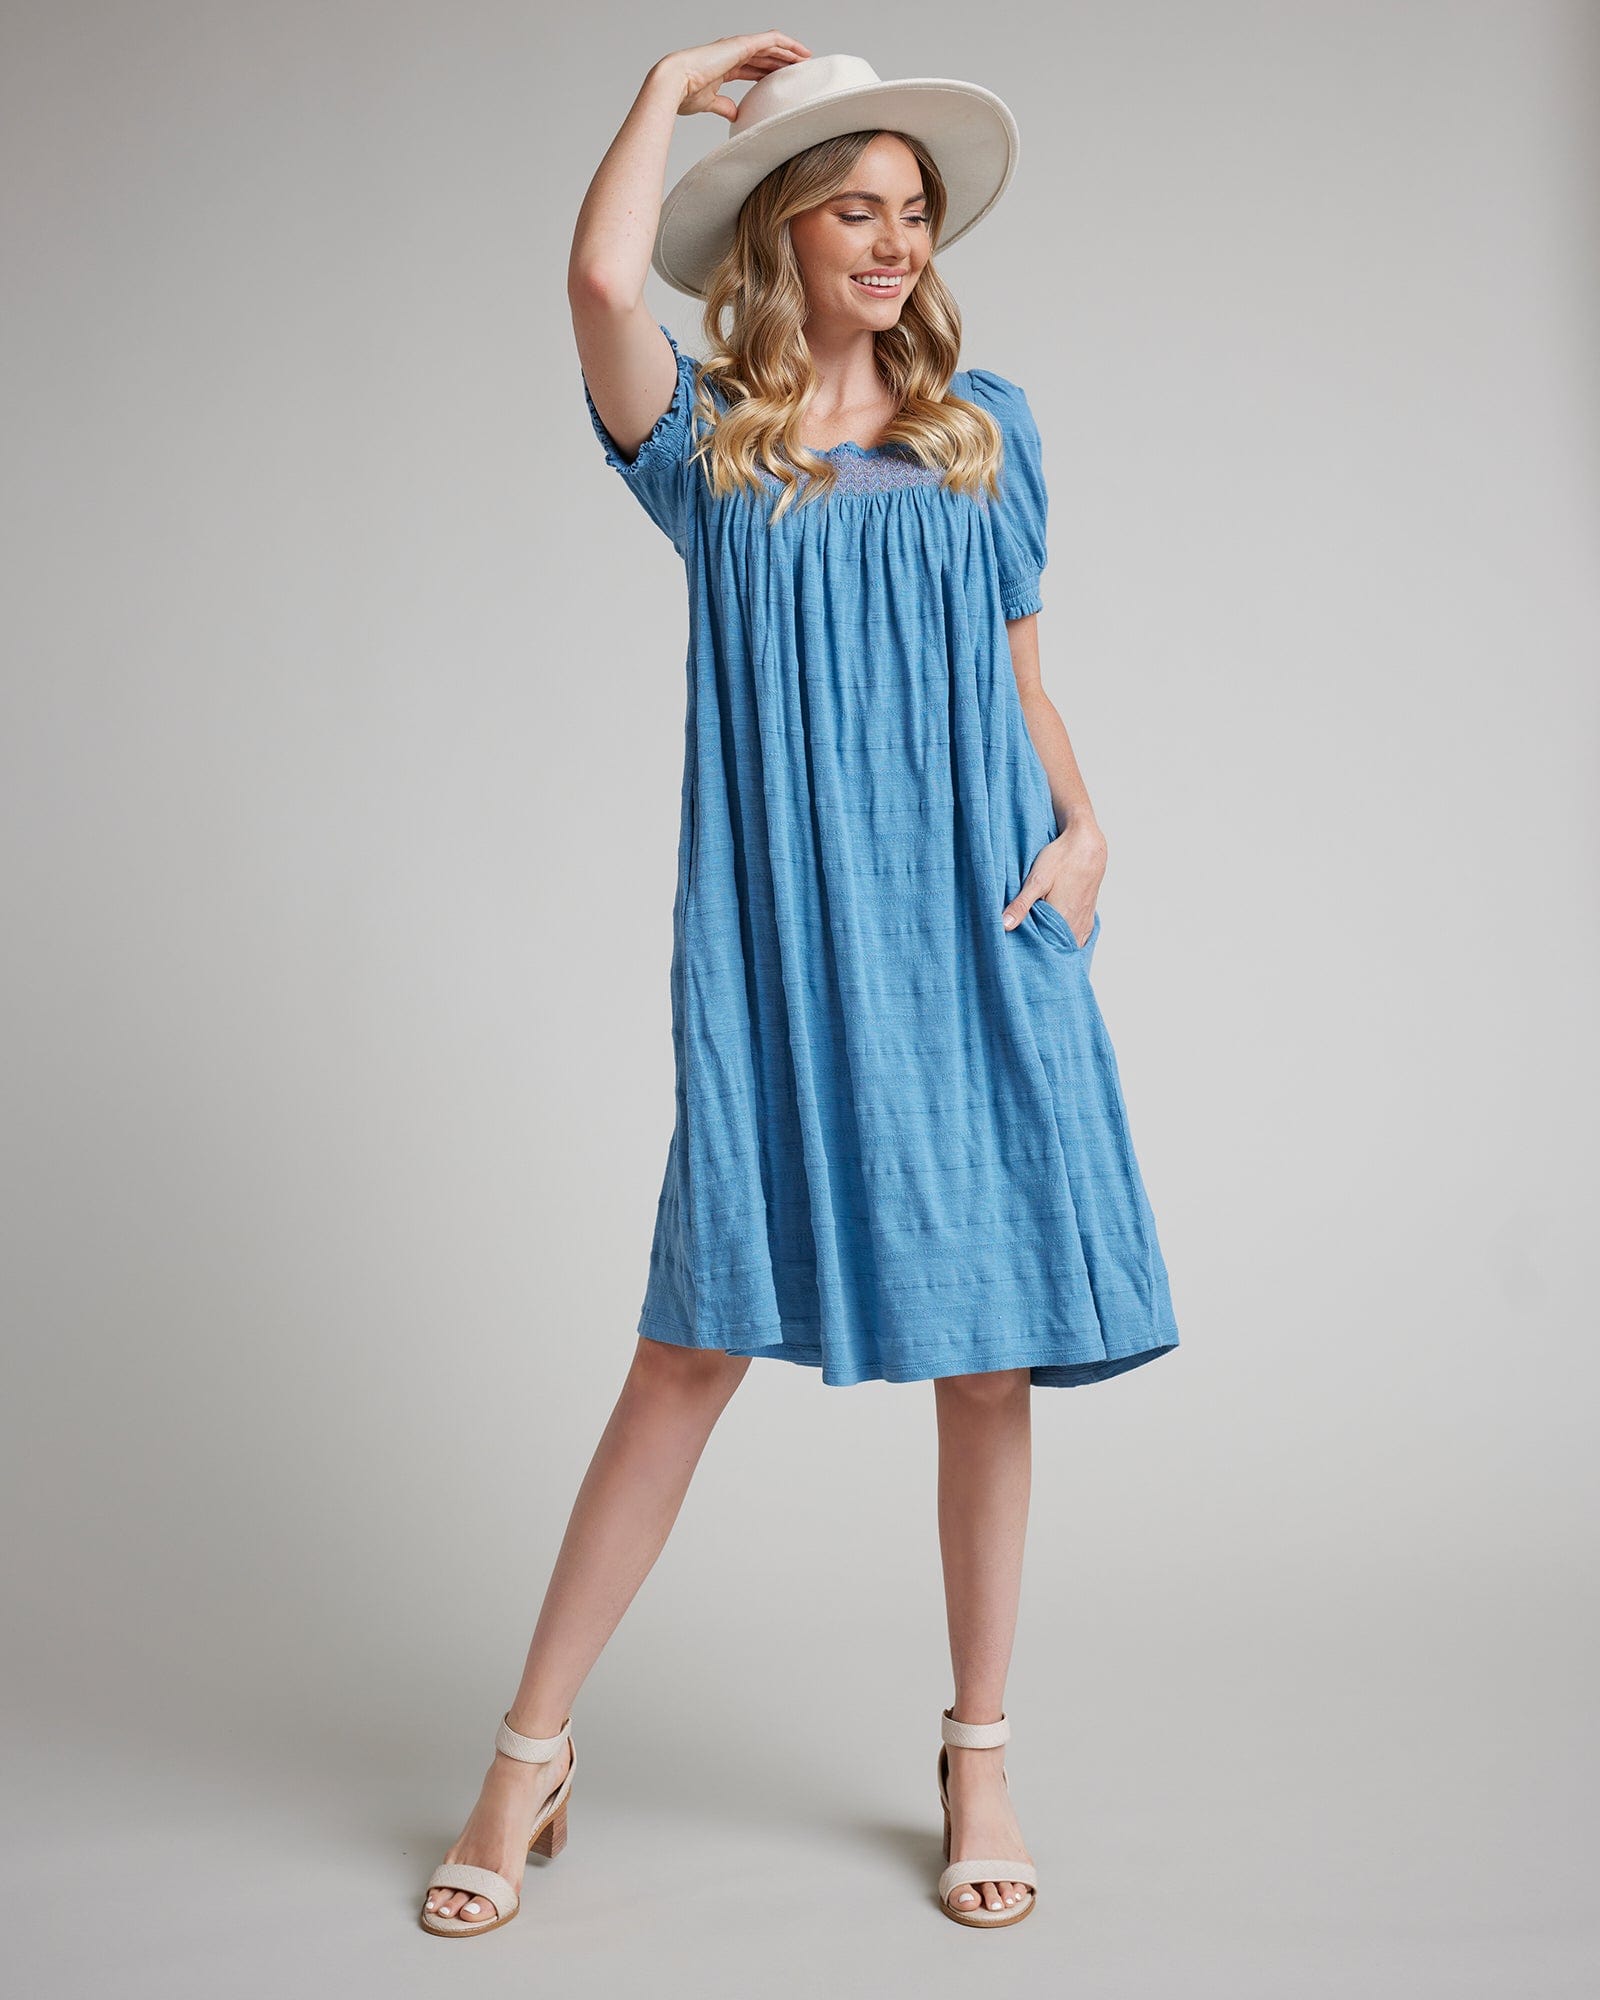 Woman in a short sleeve, knee-length, blue dress with pockets